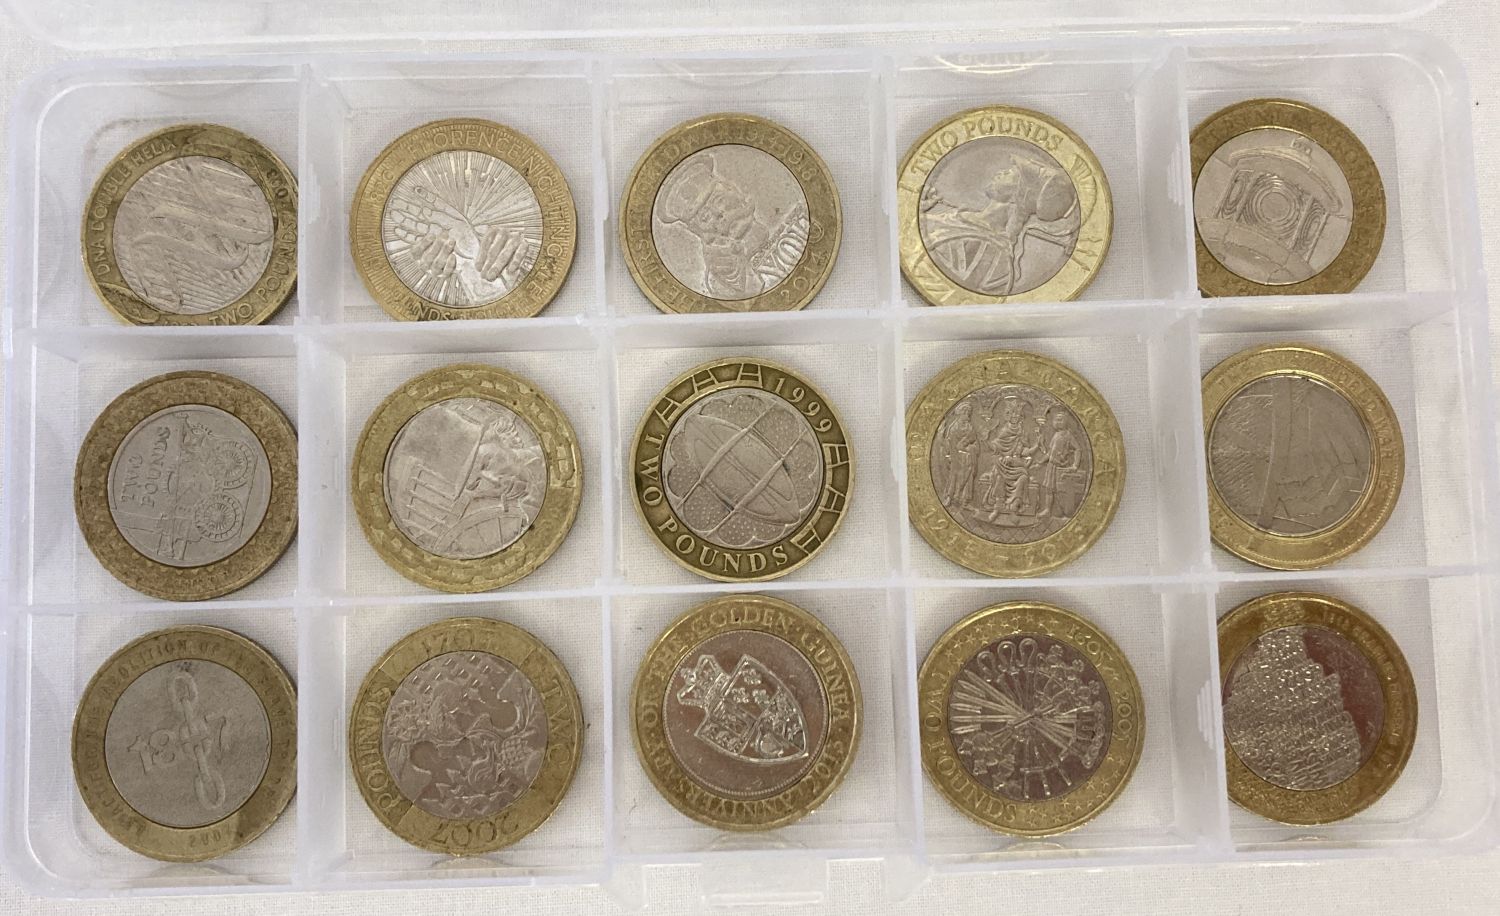 A collection of 15 commemorative £2 coins.